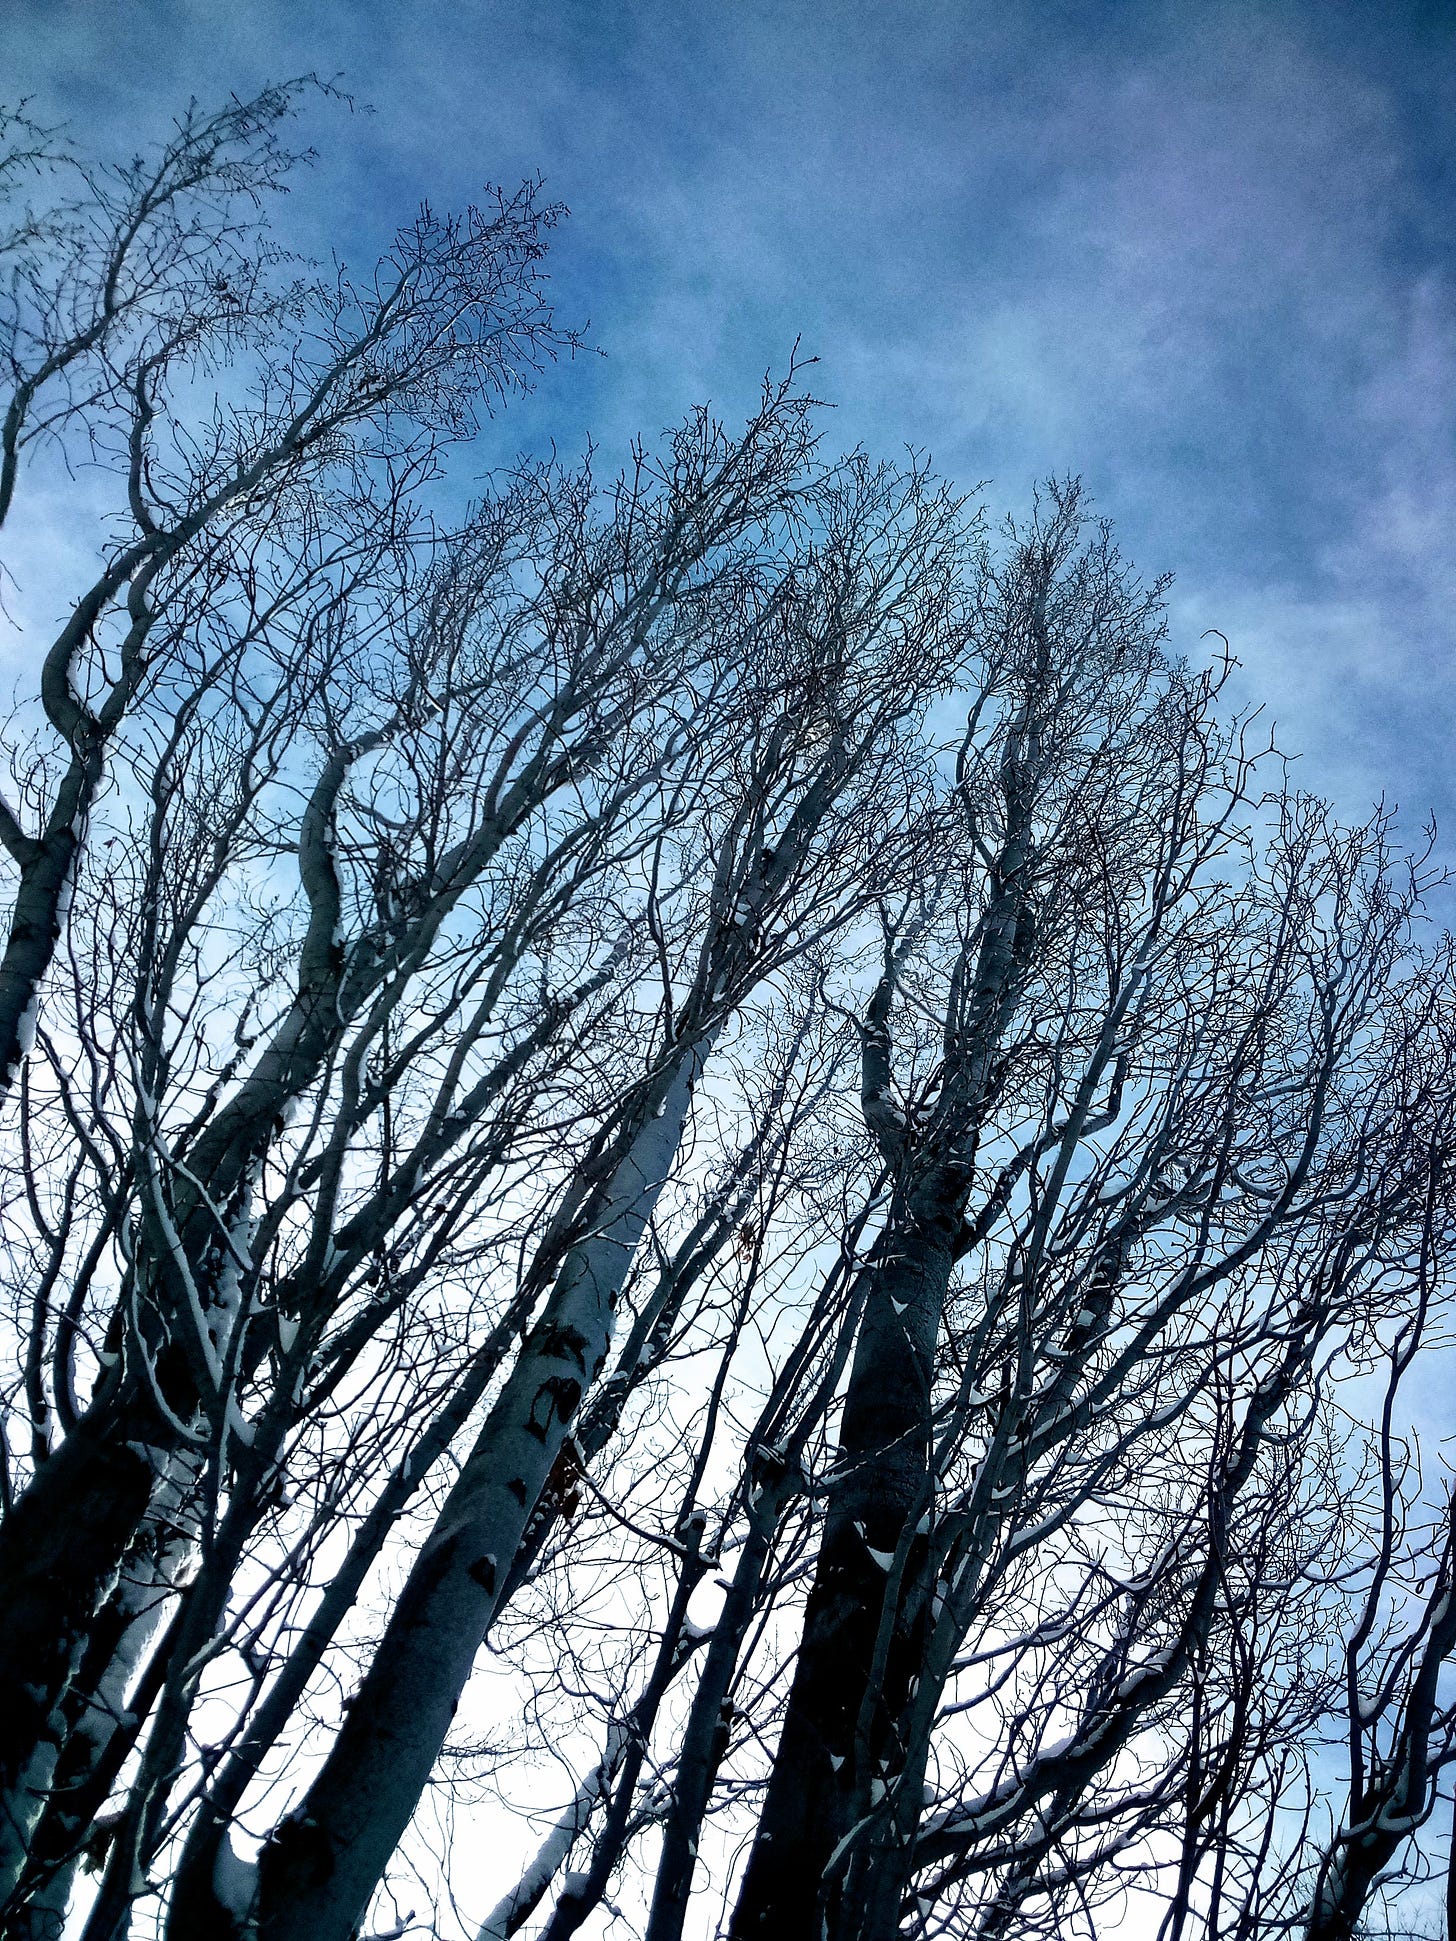 Winter trees bare against a cloudy sky